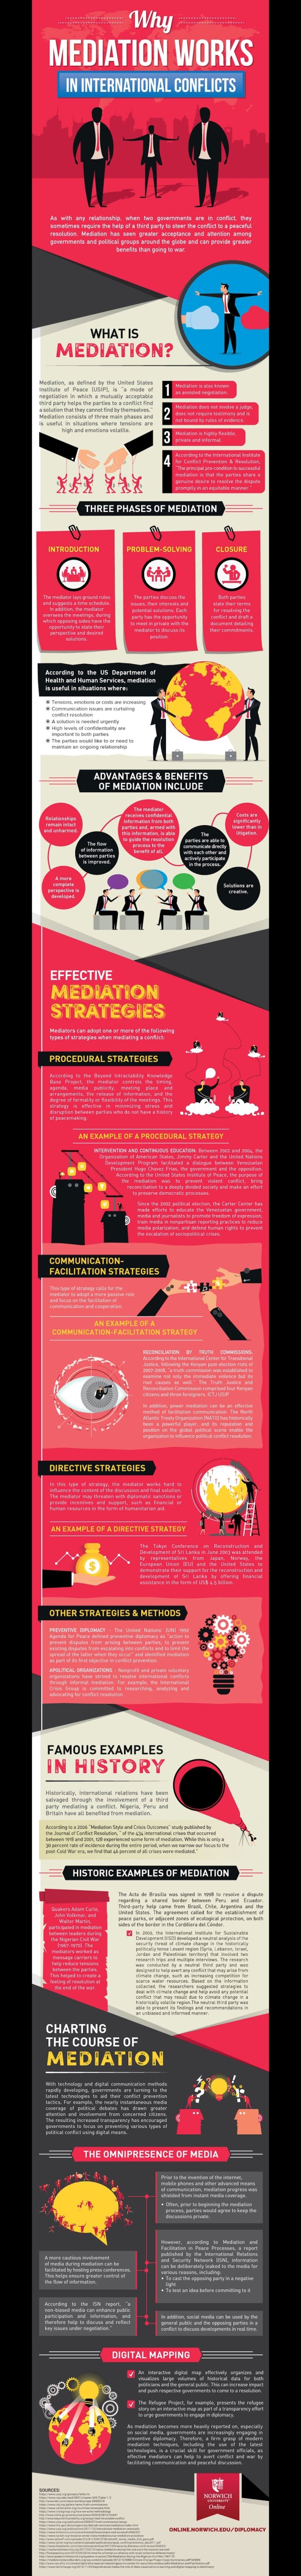 infographic - how mediation works in international conflicts